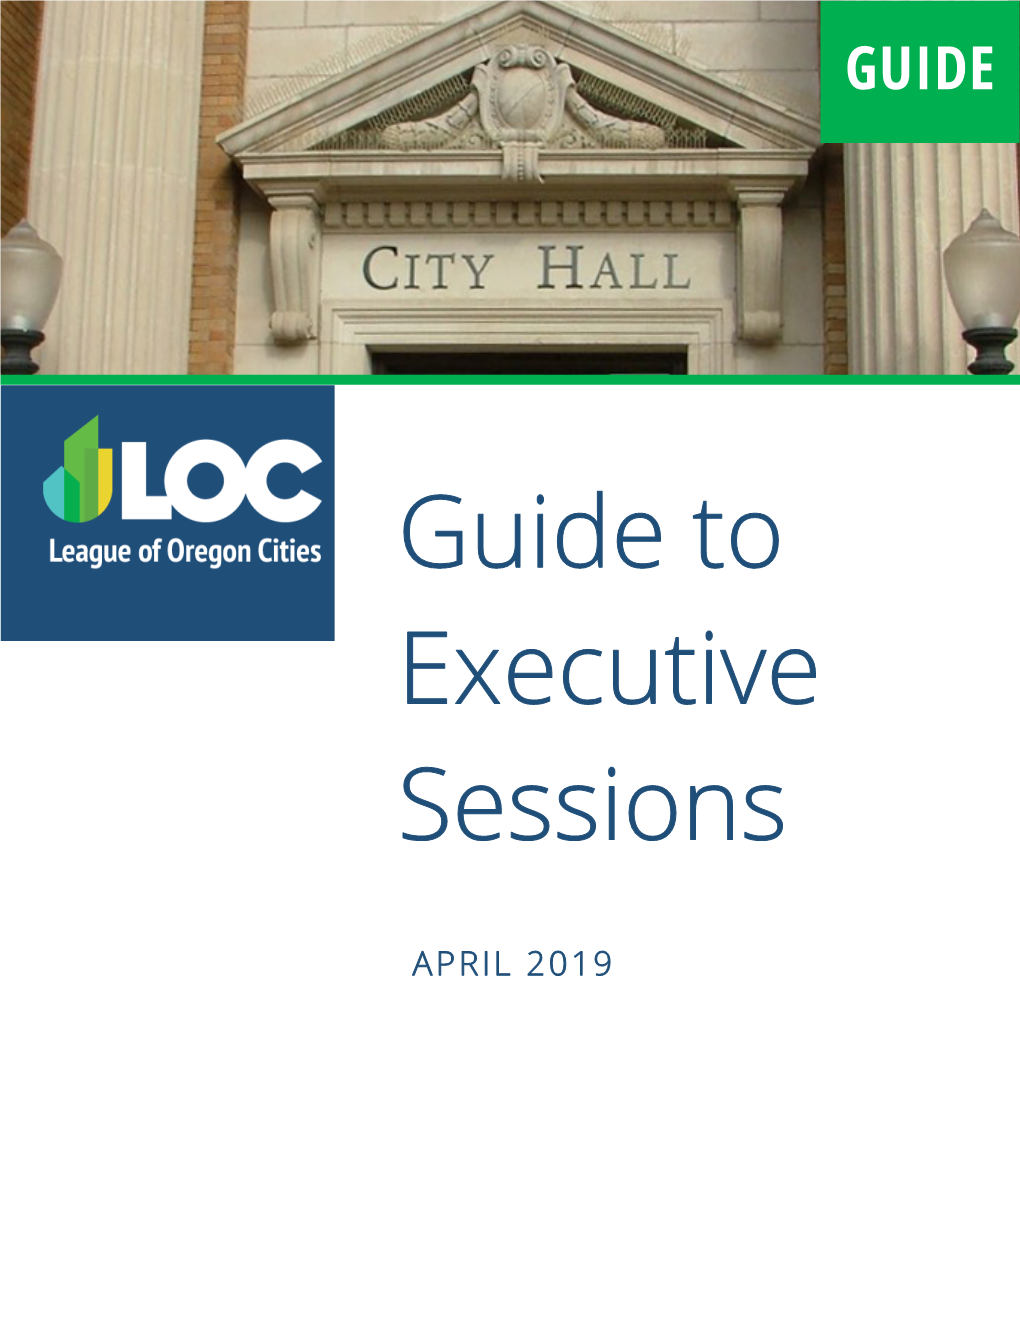 Guide to Executive Sessions